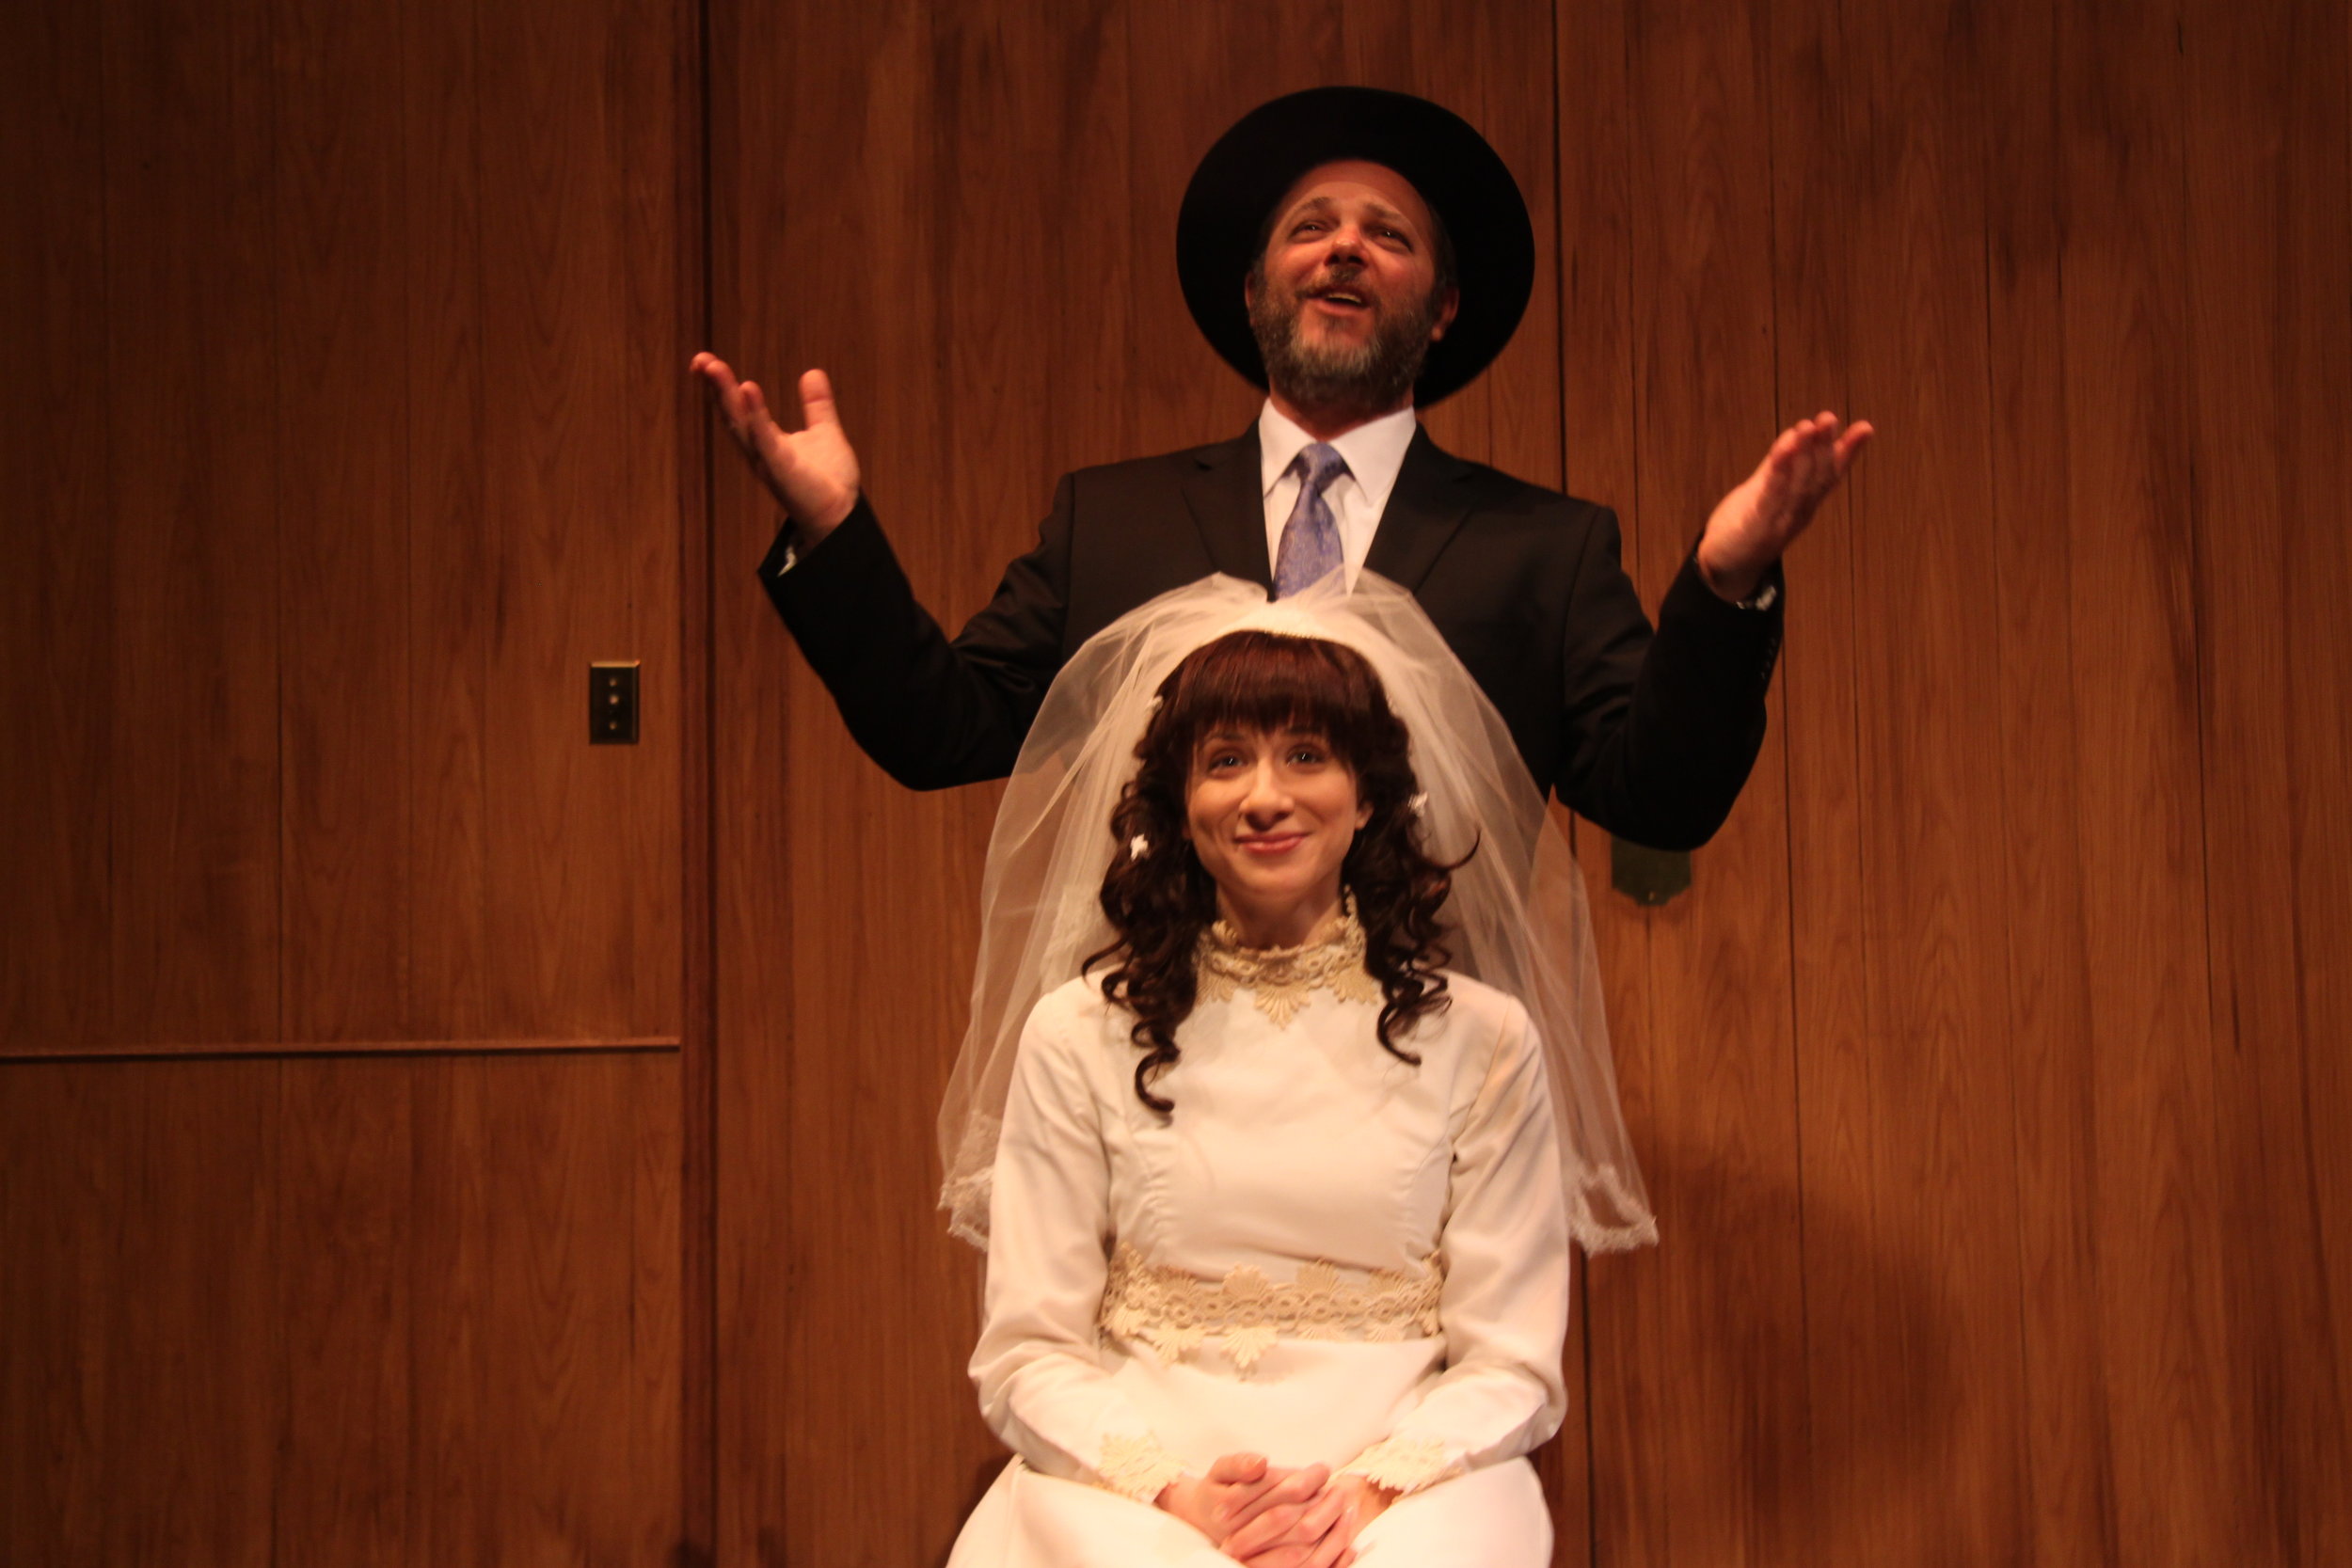  Richard Greenblatt as Morty and Julie Tepperman as Rachel in YICHUD (Seclusion) 